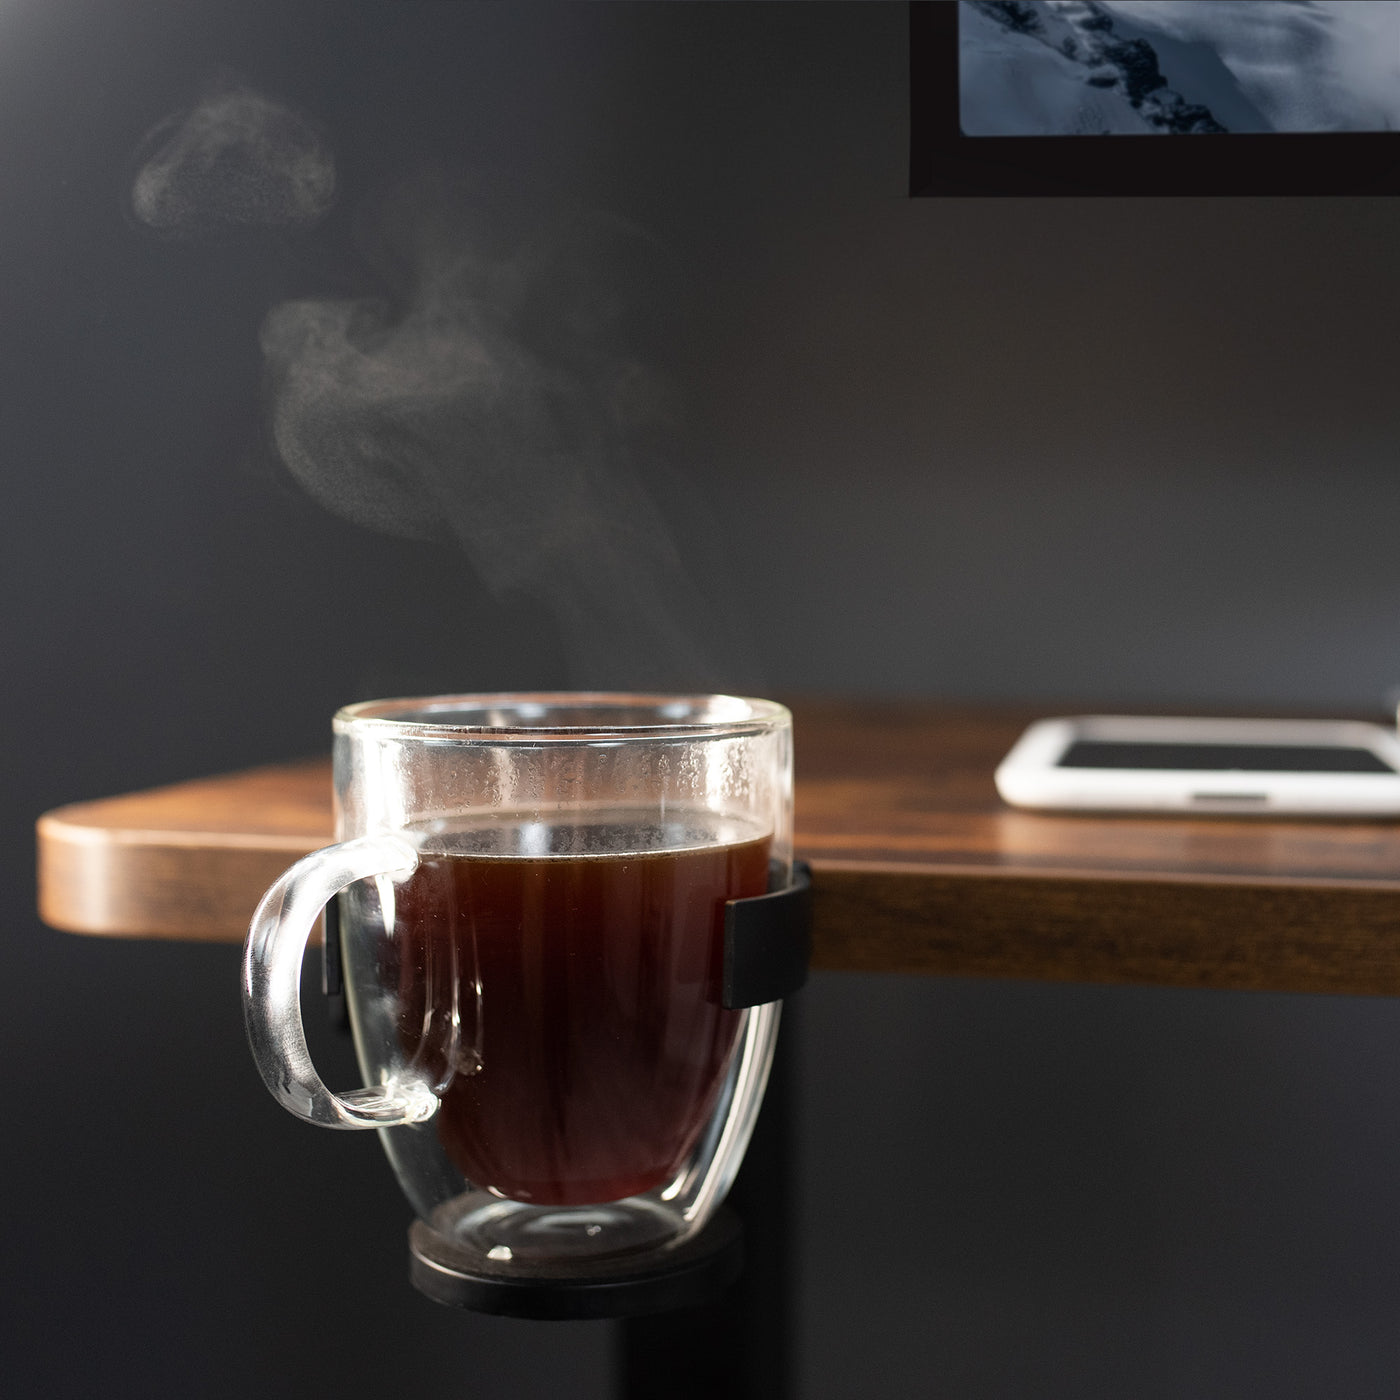 The side of the desk cup holder securely holds a hot cup of steaming coffee.